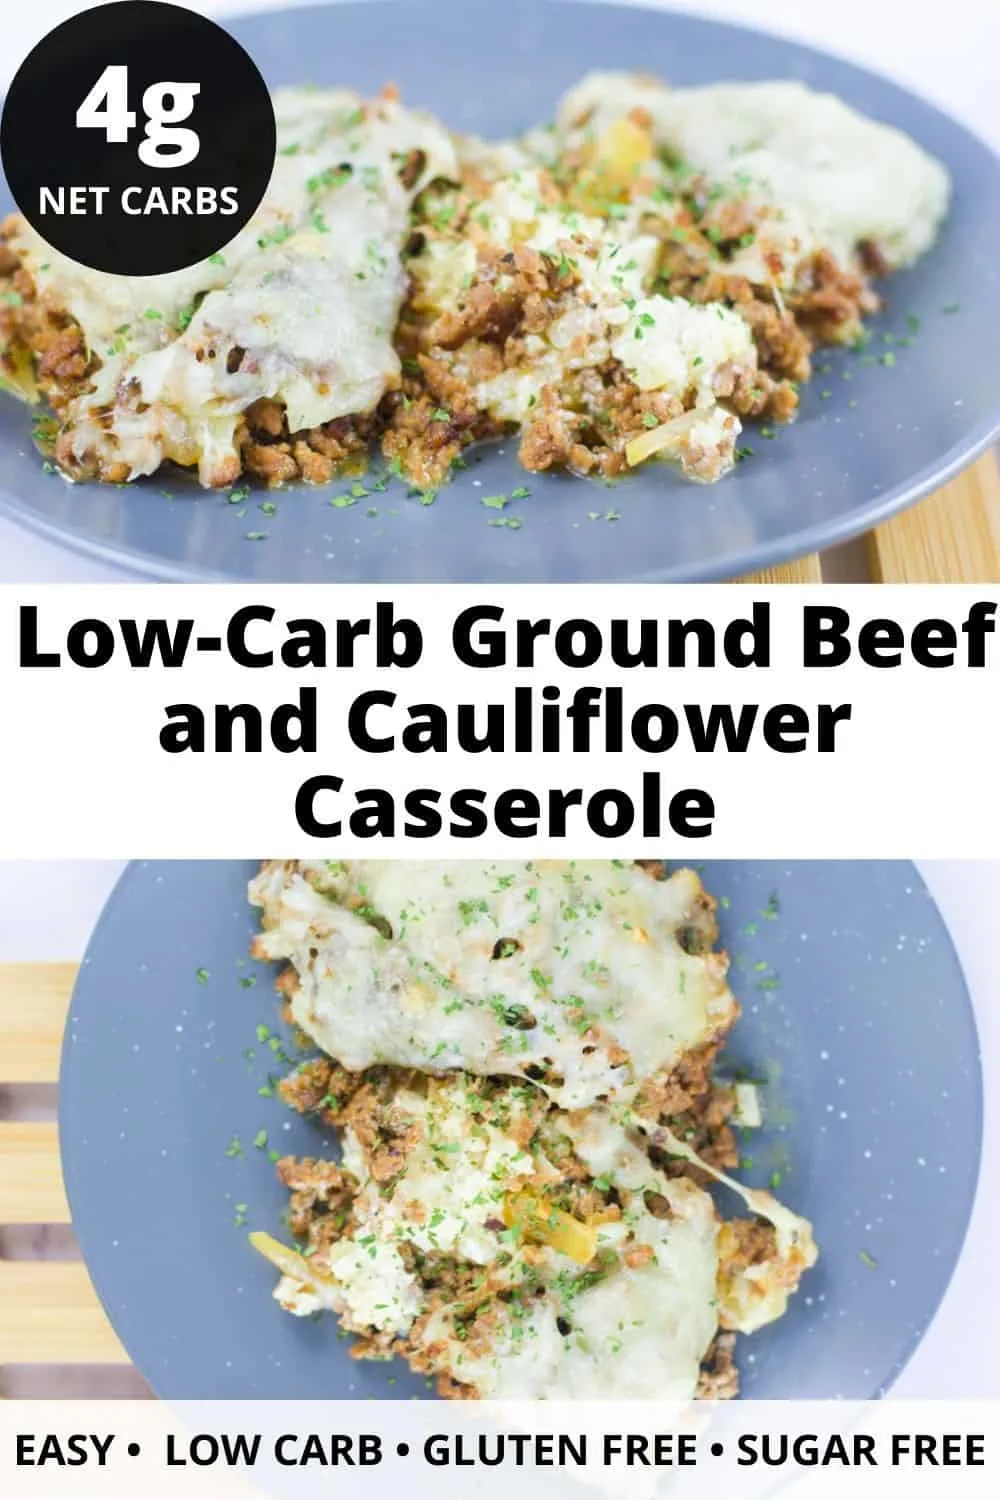 Low-Carb Ground Beef and Cauliflower Casserole